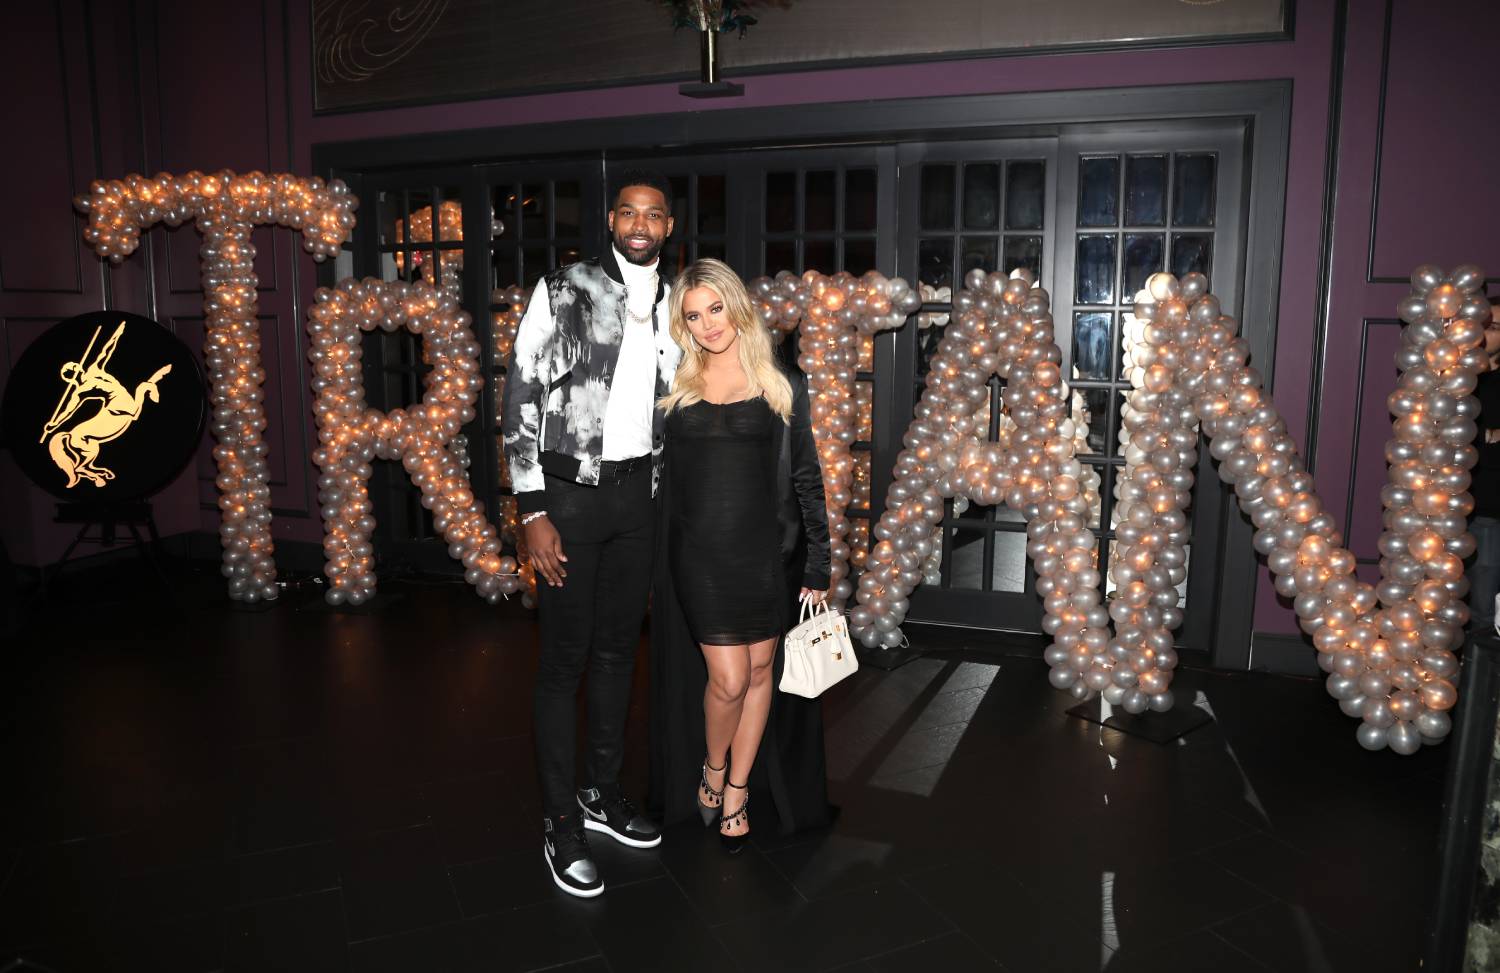 Tristan Thompson and Khloe Kardashian pose for a photo as Remy Martin celebrates Tristan Thompson's Birthday at Beauty & Essex on March 10, 2018 in Los Angeles, California.